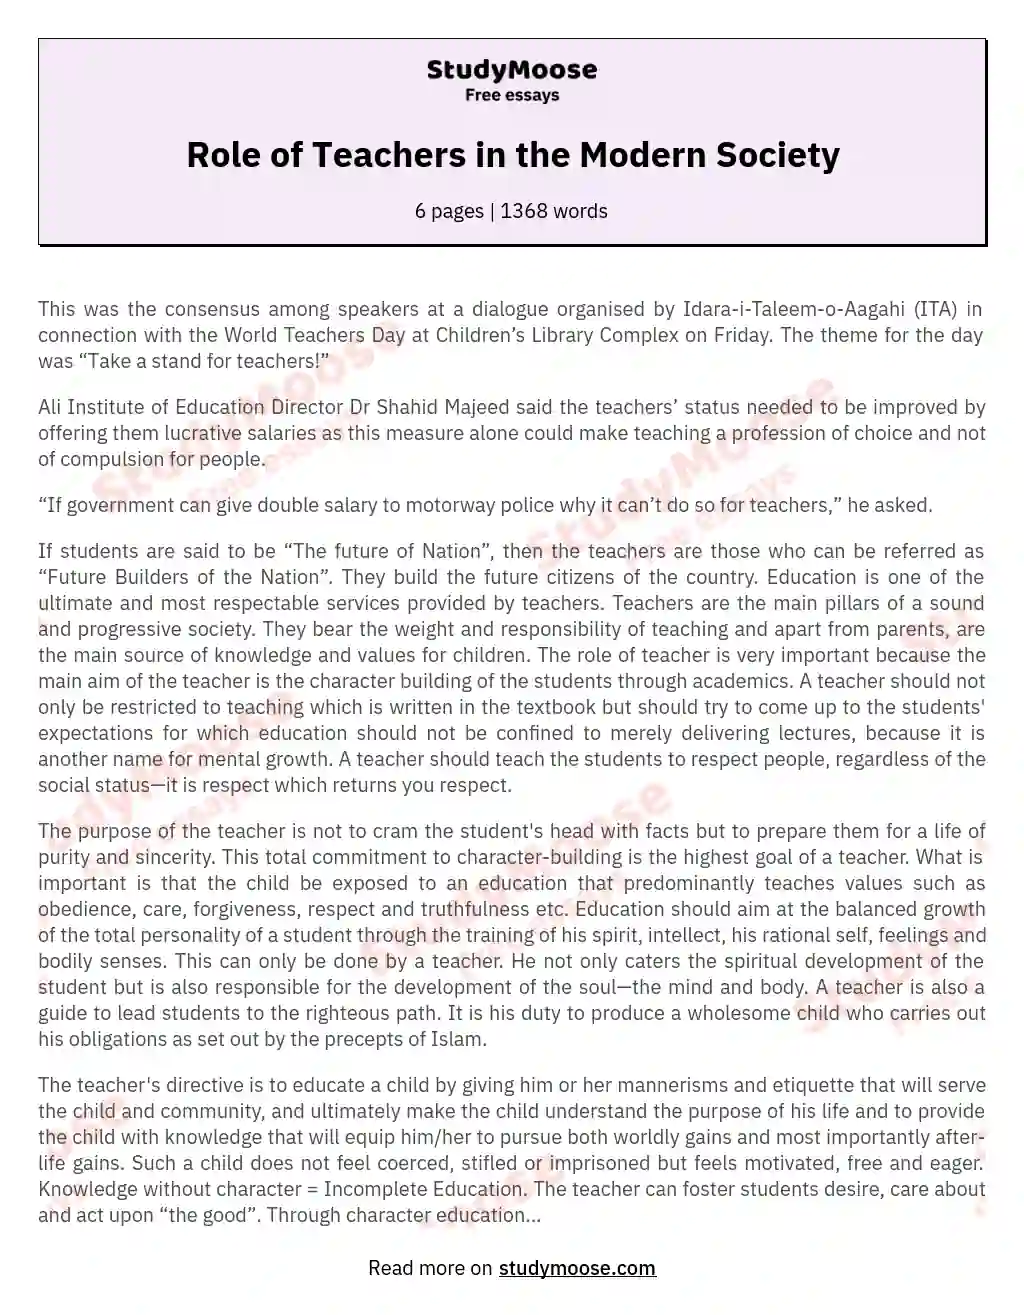 Role of Teachers in the Modern Society essay